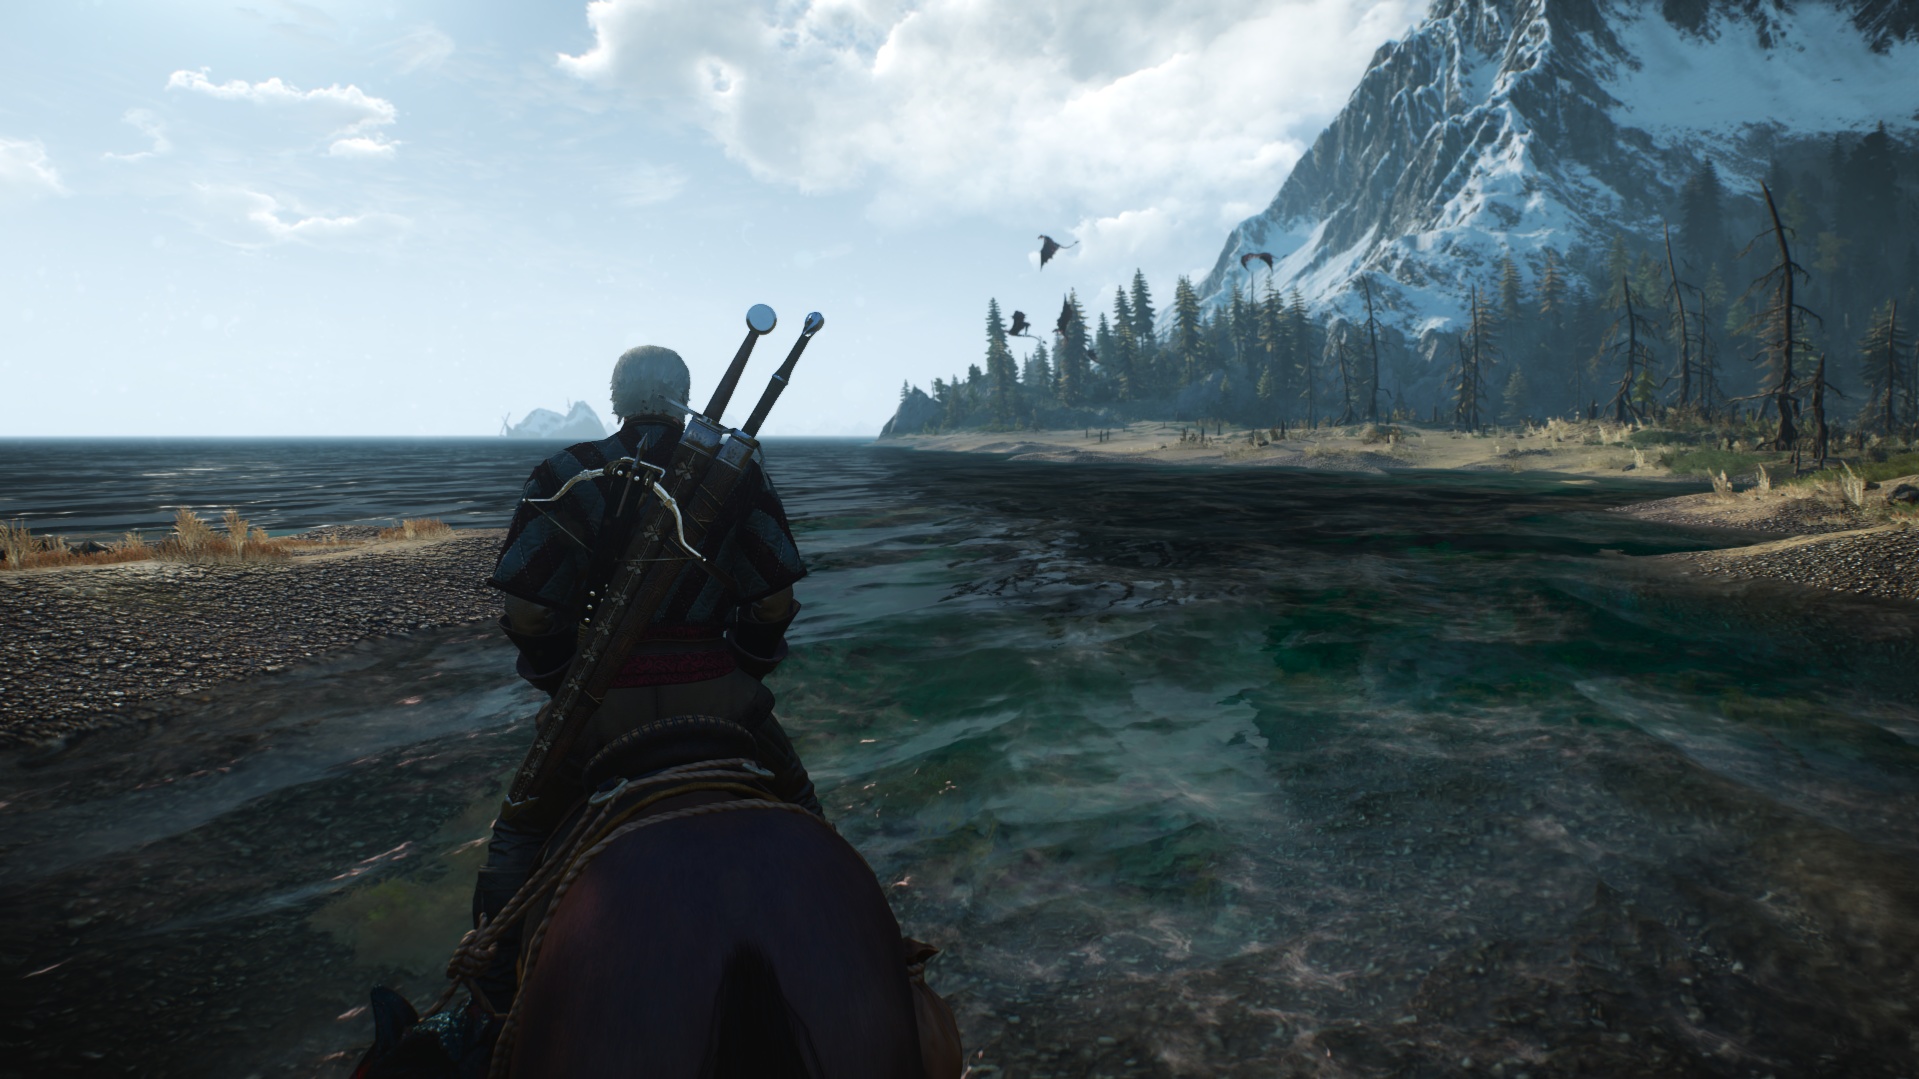 (Even without ray tracing, The Witcher 3 is really nice to look at after the Next Gen update.)